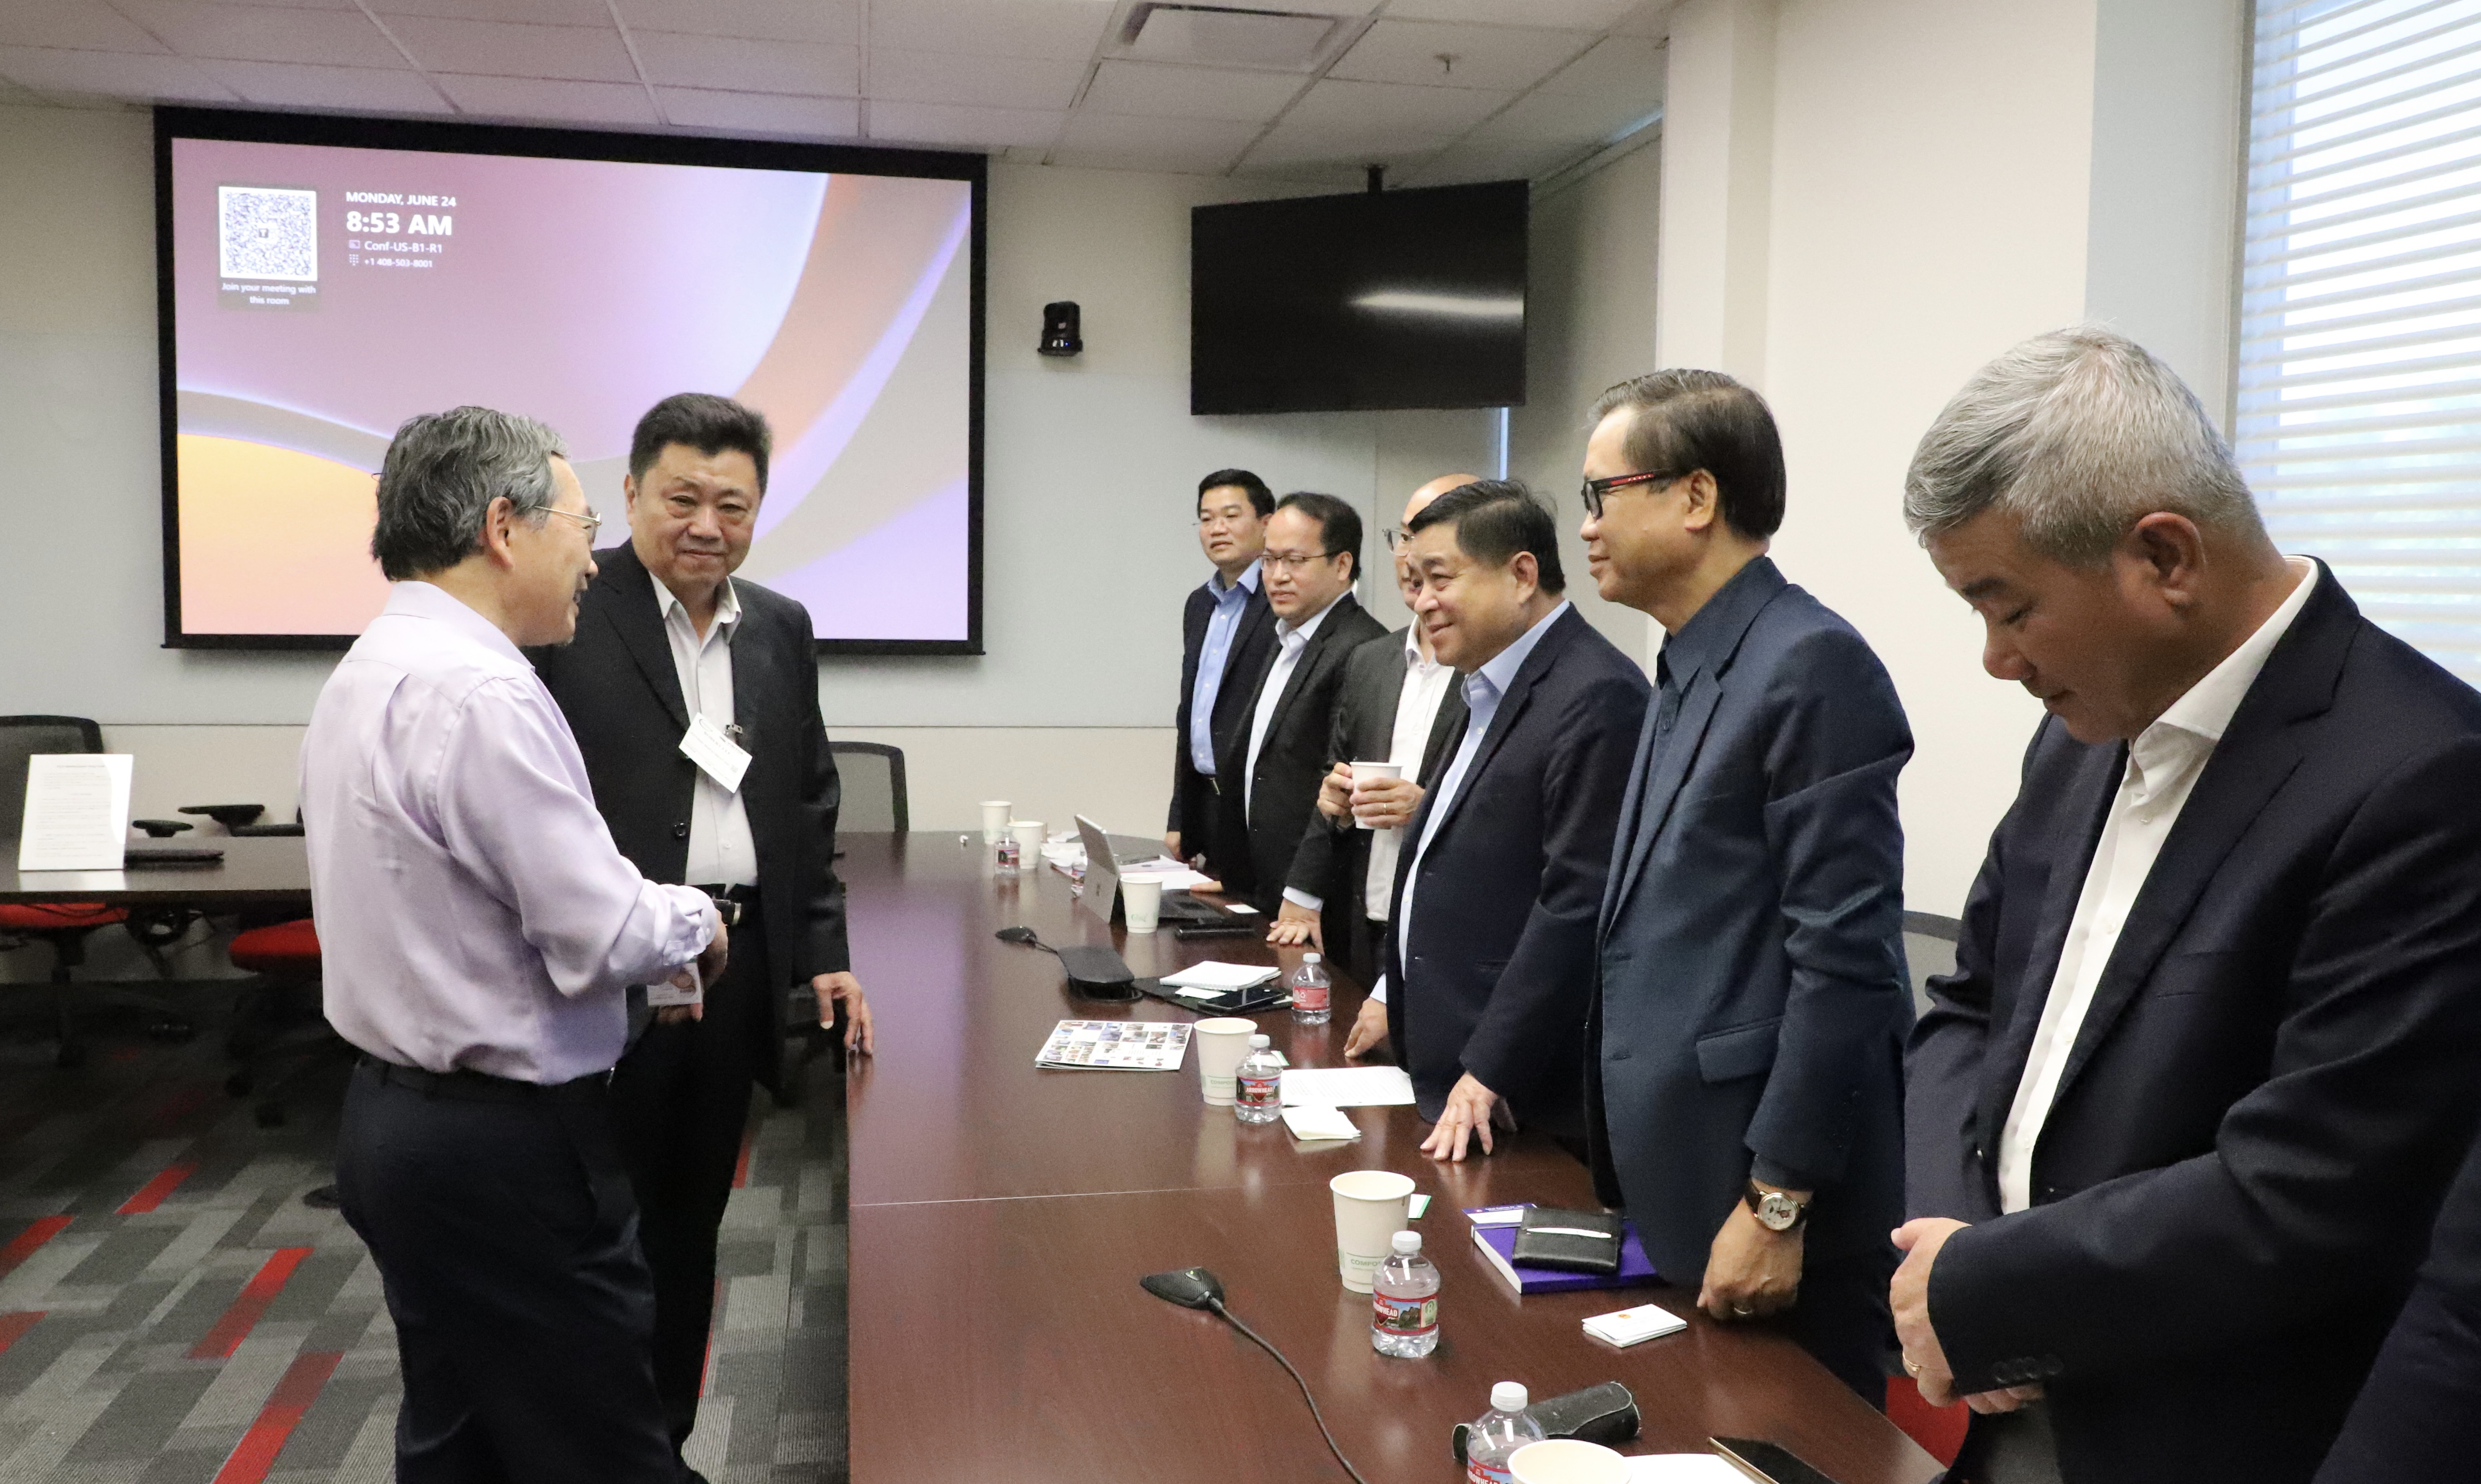 Minister Nguyen Chi Dung had a meeting with with leaders of Super Micro Computer, Inc.